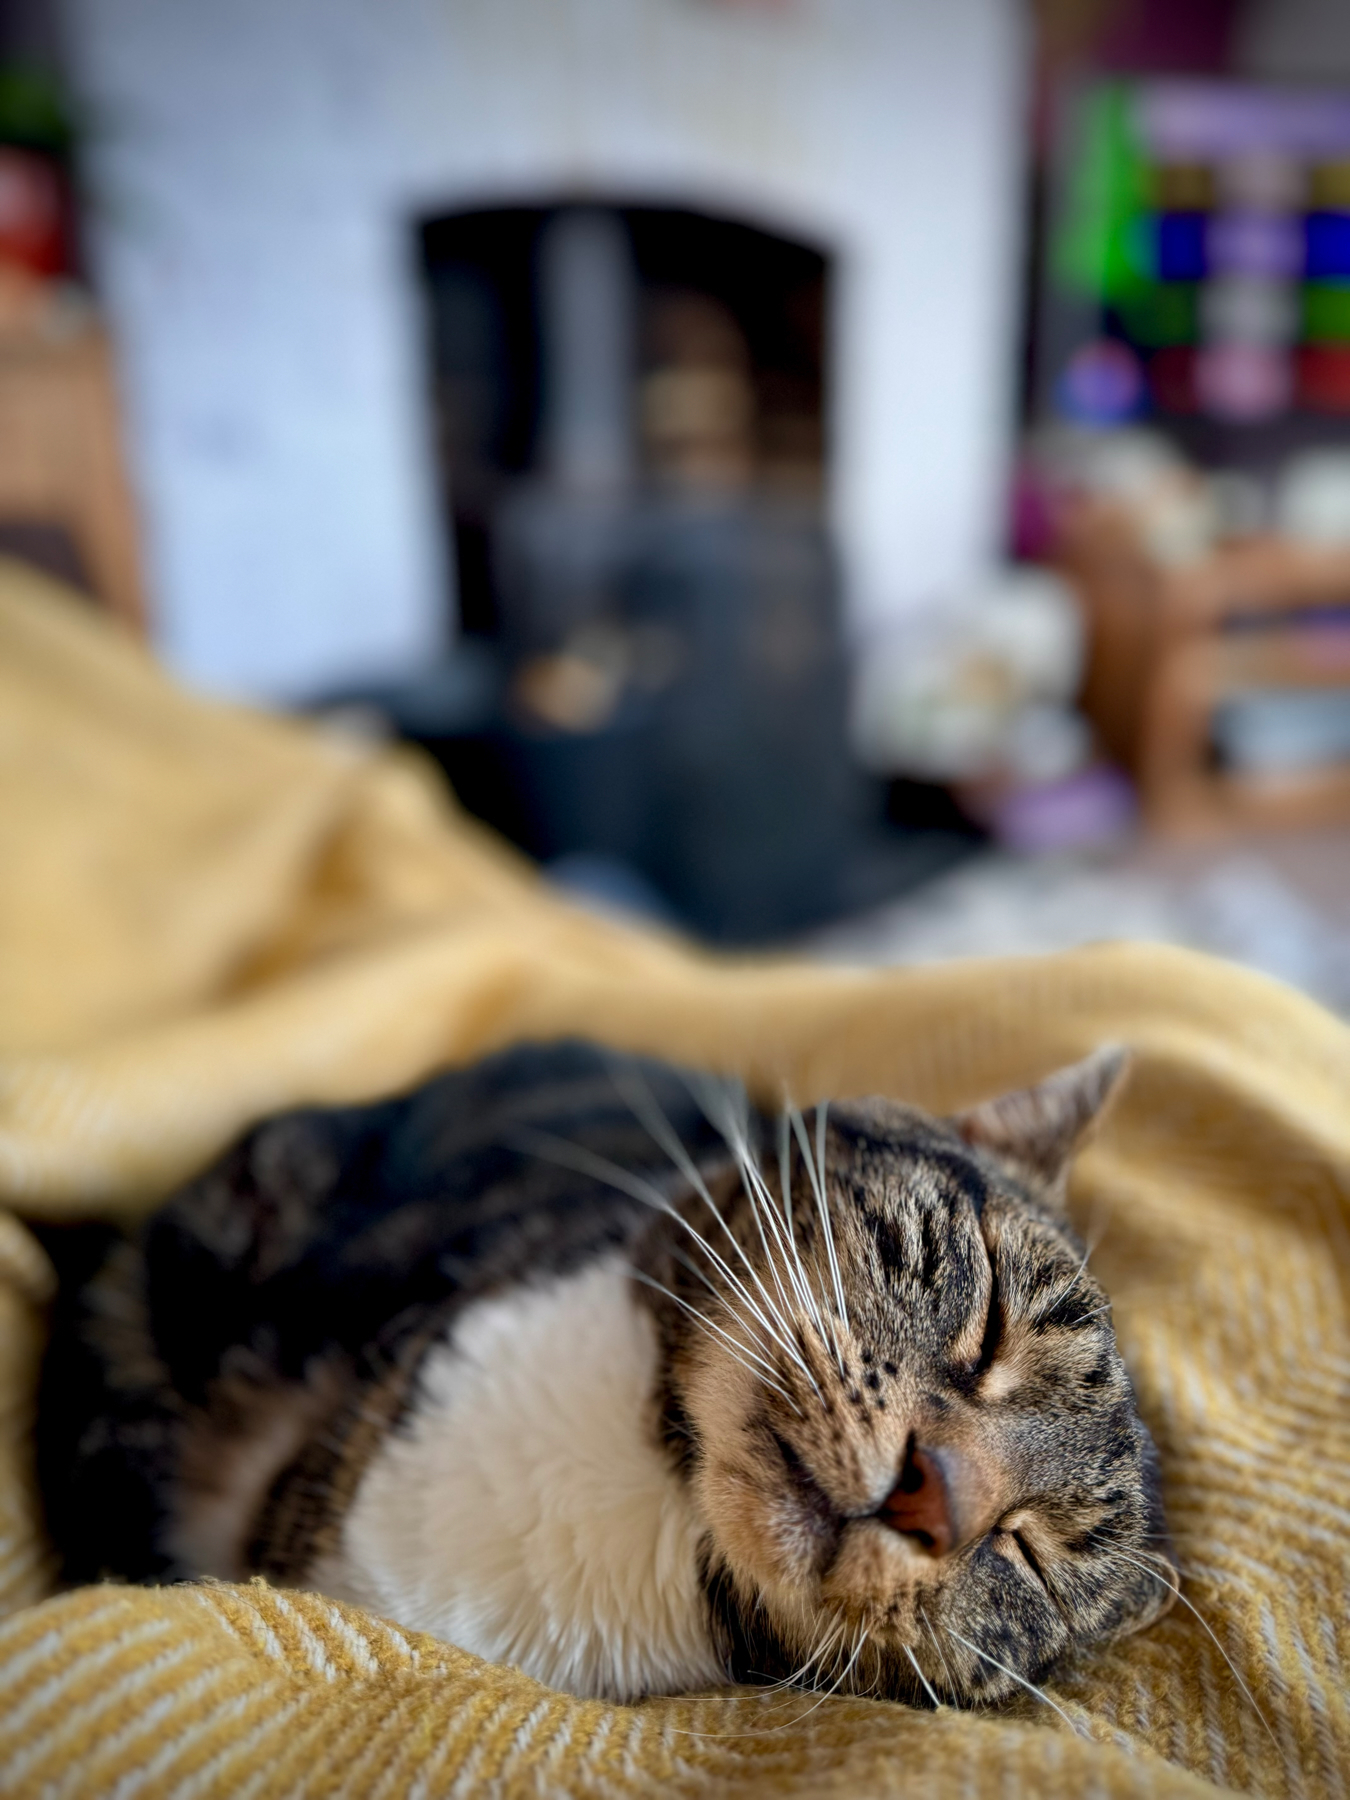 A sleeping cat on a yellow knitted blanket with a blurred background of a room with a fireplace and colorful decor.